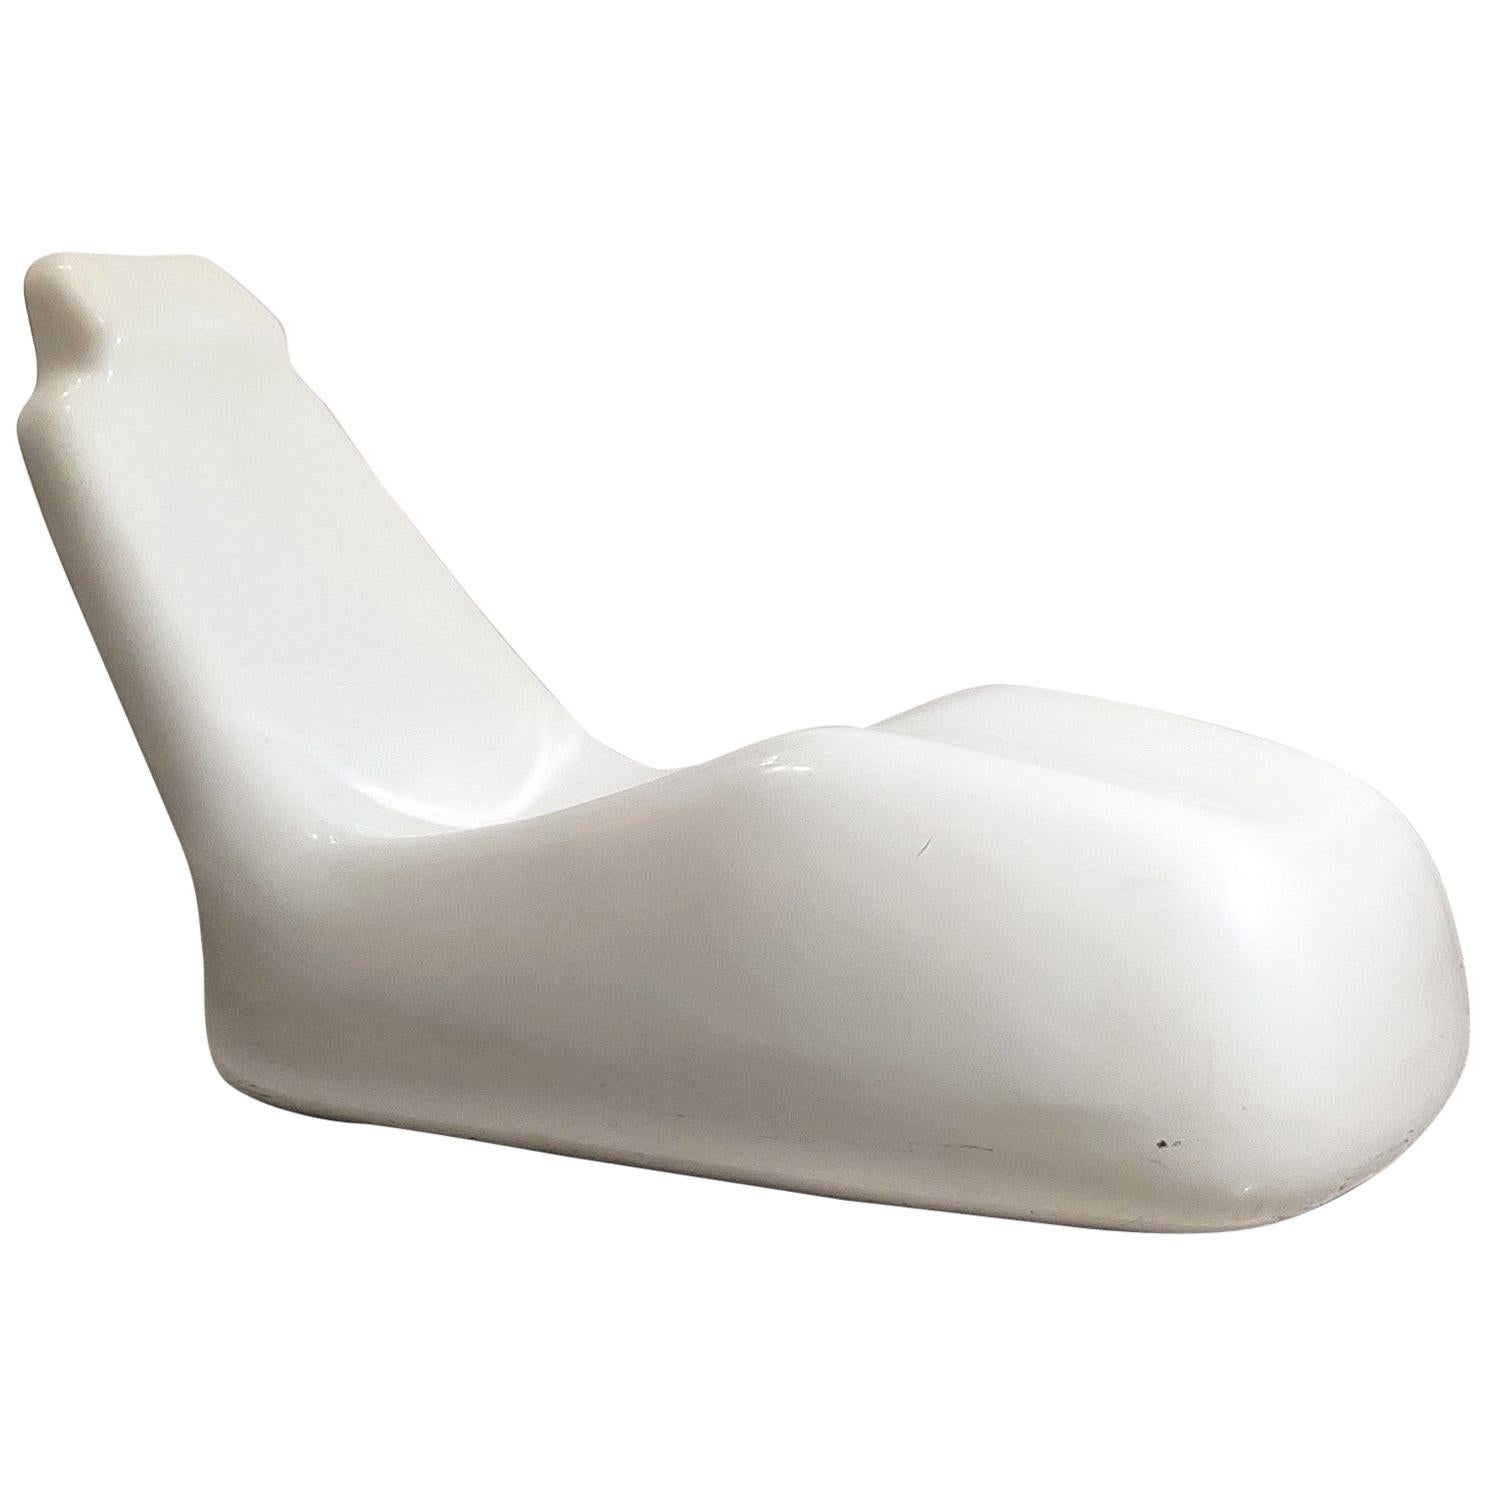 Midcentury White Lounge Chair "Moby Dick" by Alberto Rosselli for Saporiti, 1969